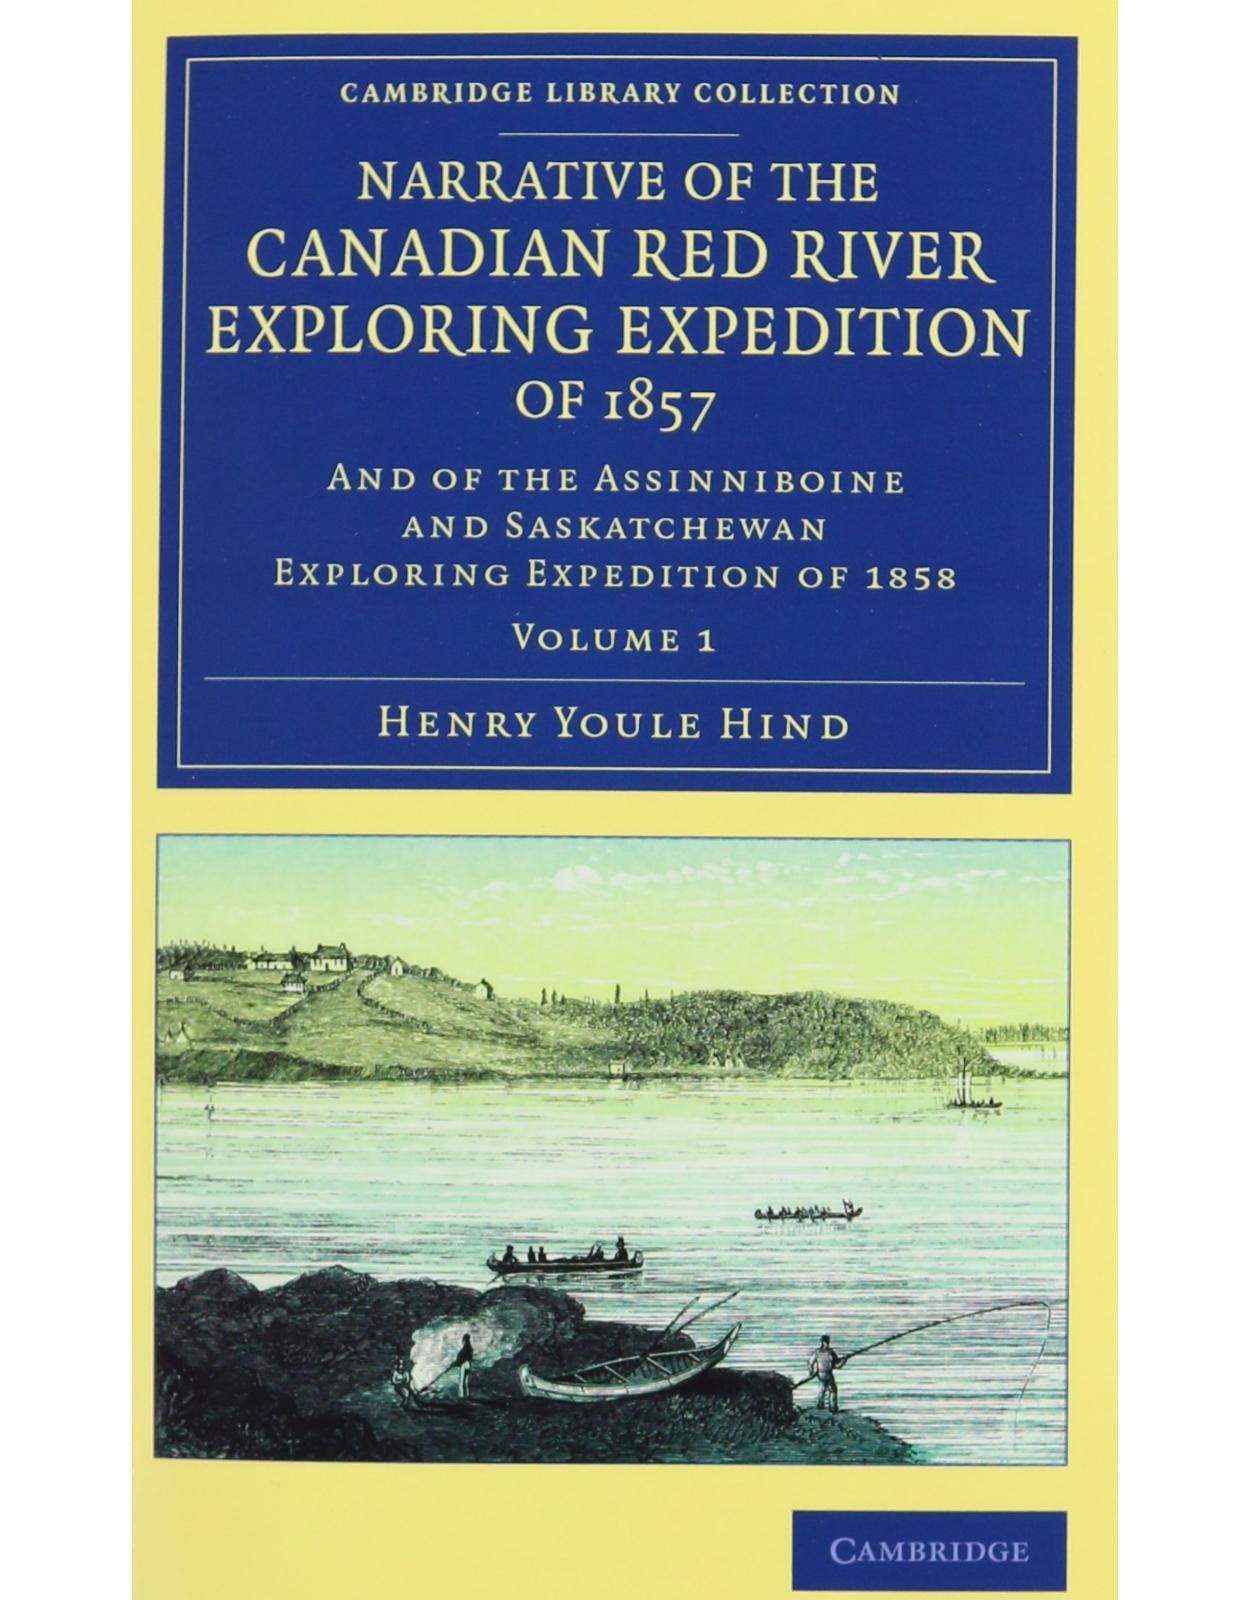 Narrative of the Canadian Red River Exploring Expedition of 1857 2 Volume Set: And of the Assinniboine and Saskatchewan Exploring Expedition of 1858 ... Library Collection - North American History)